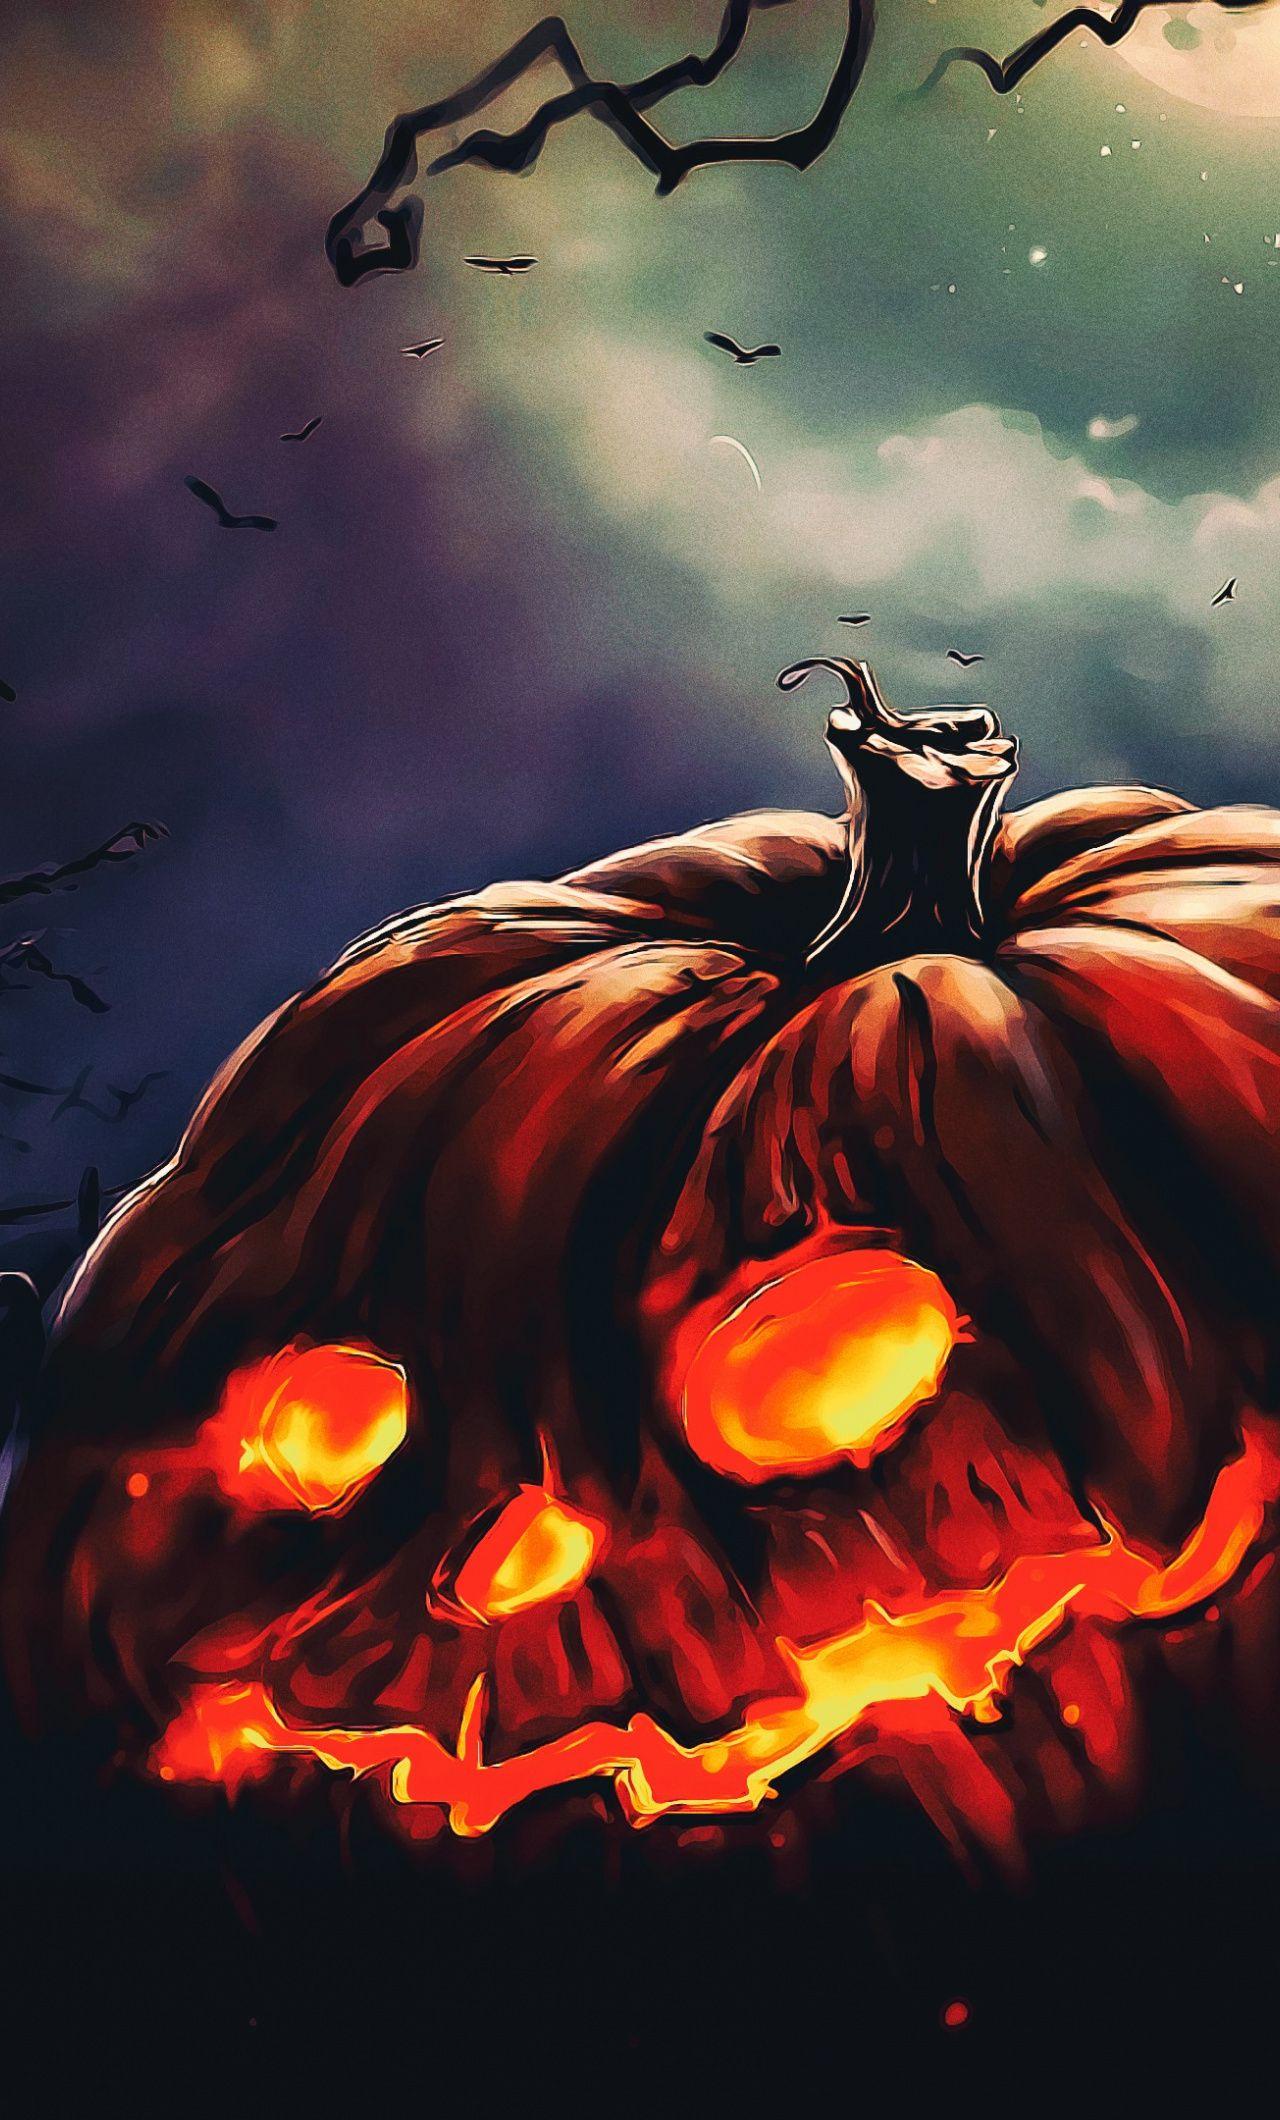 Scary Pumpkin Wallpapers - Top Free Scary Pumpkin Backgrounds ...